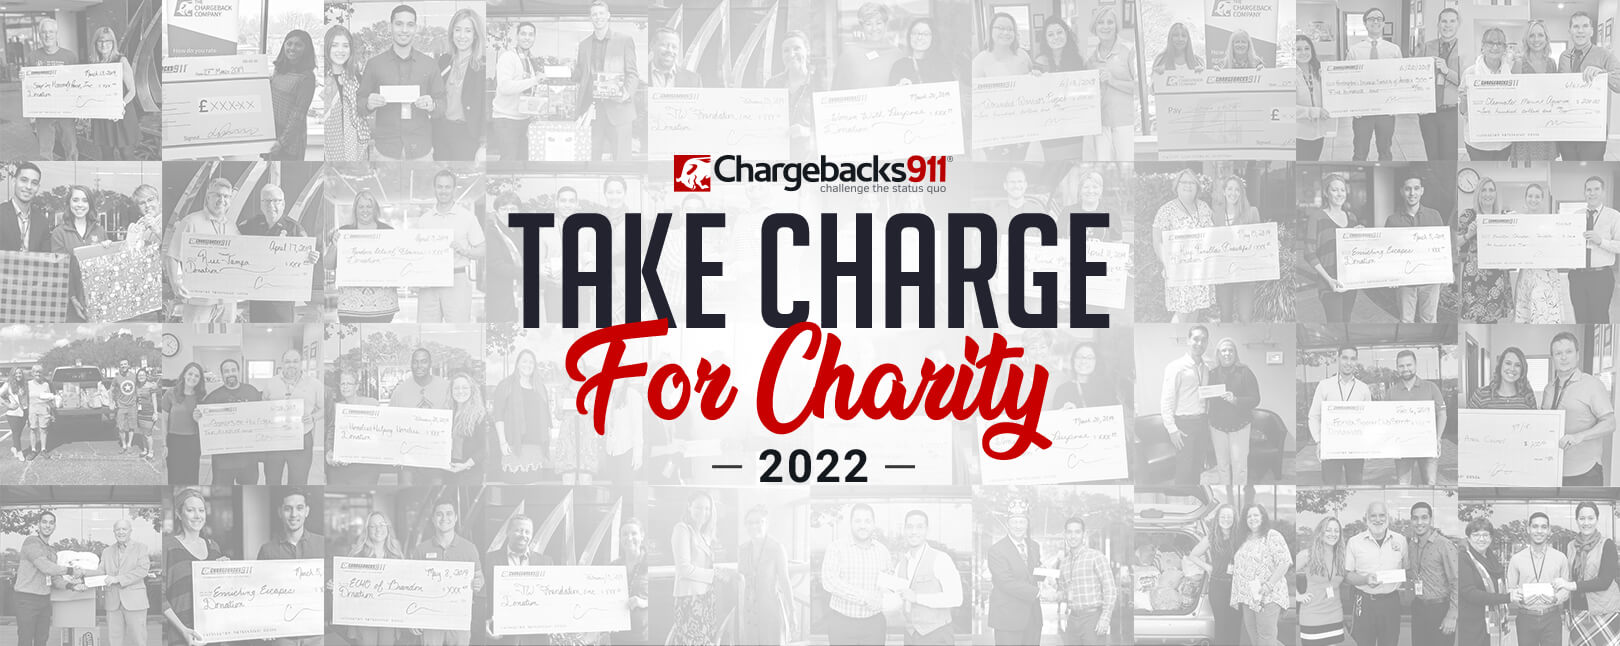 Take Charge For Charity - 2022